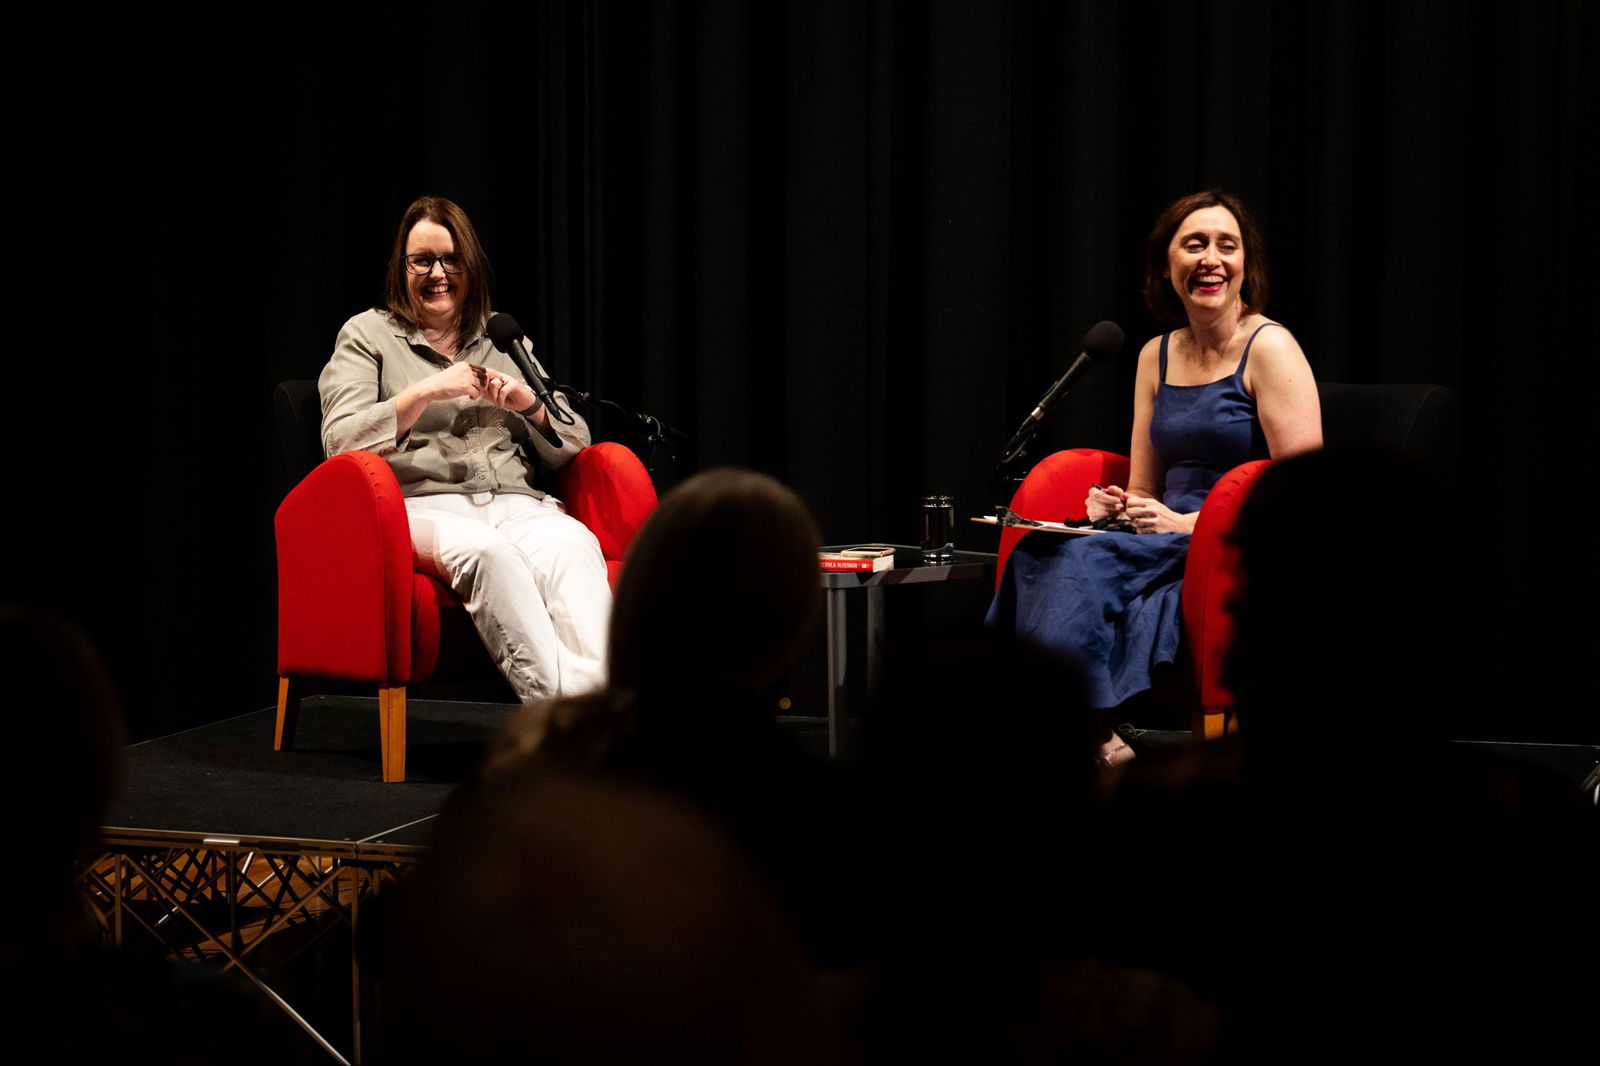 Two women laugh, sitting in red chairs side by side on a stage, with microphones in front of them.